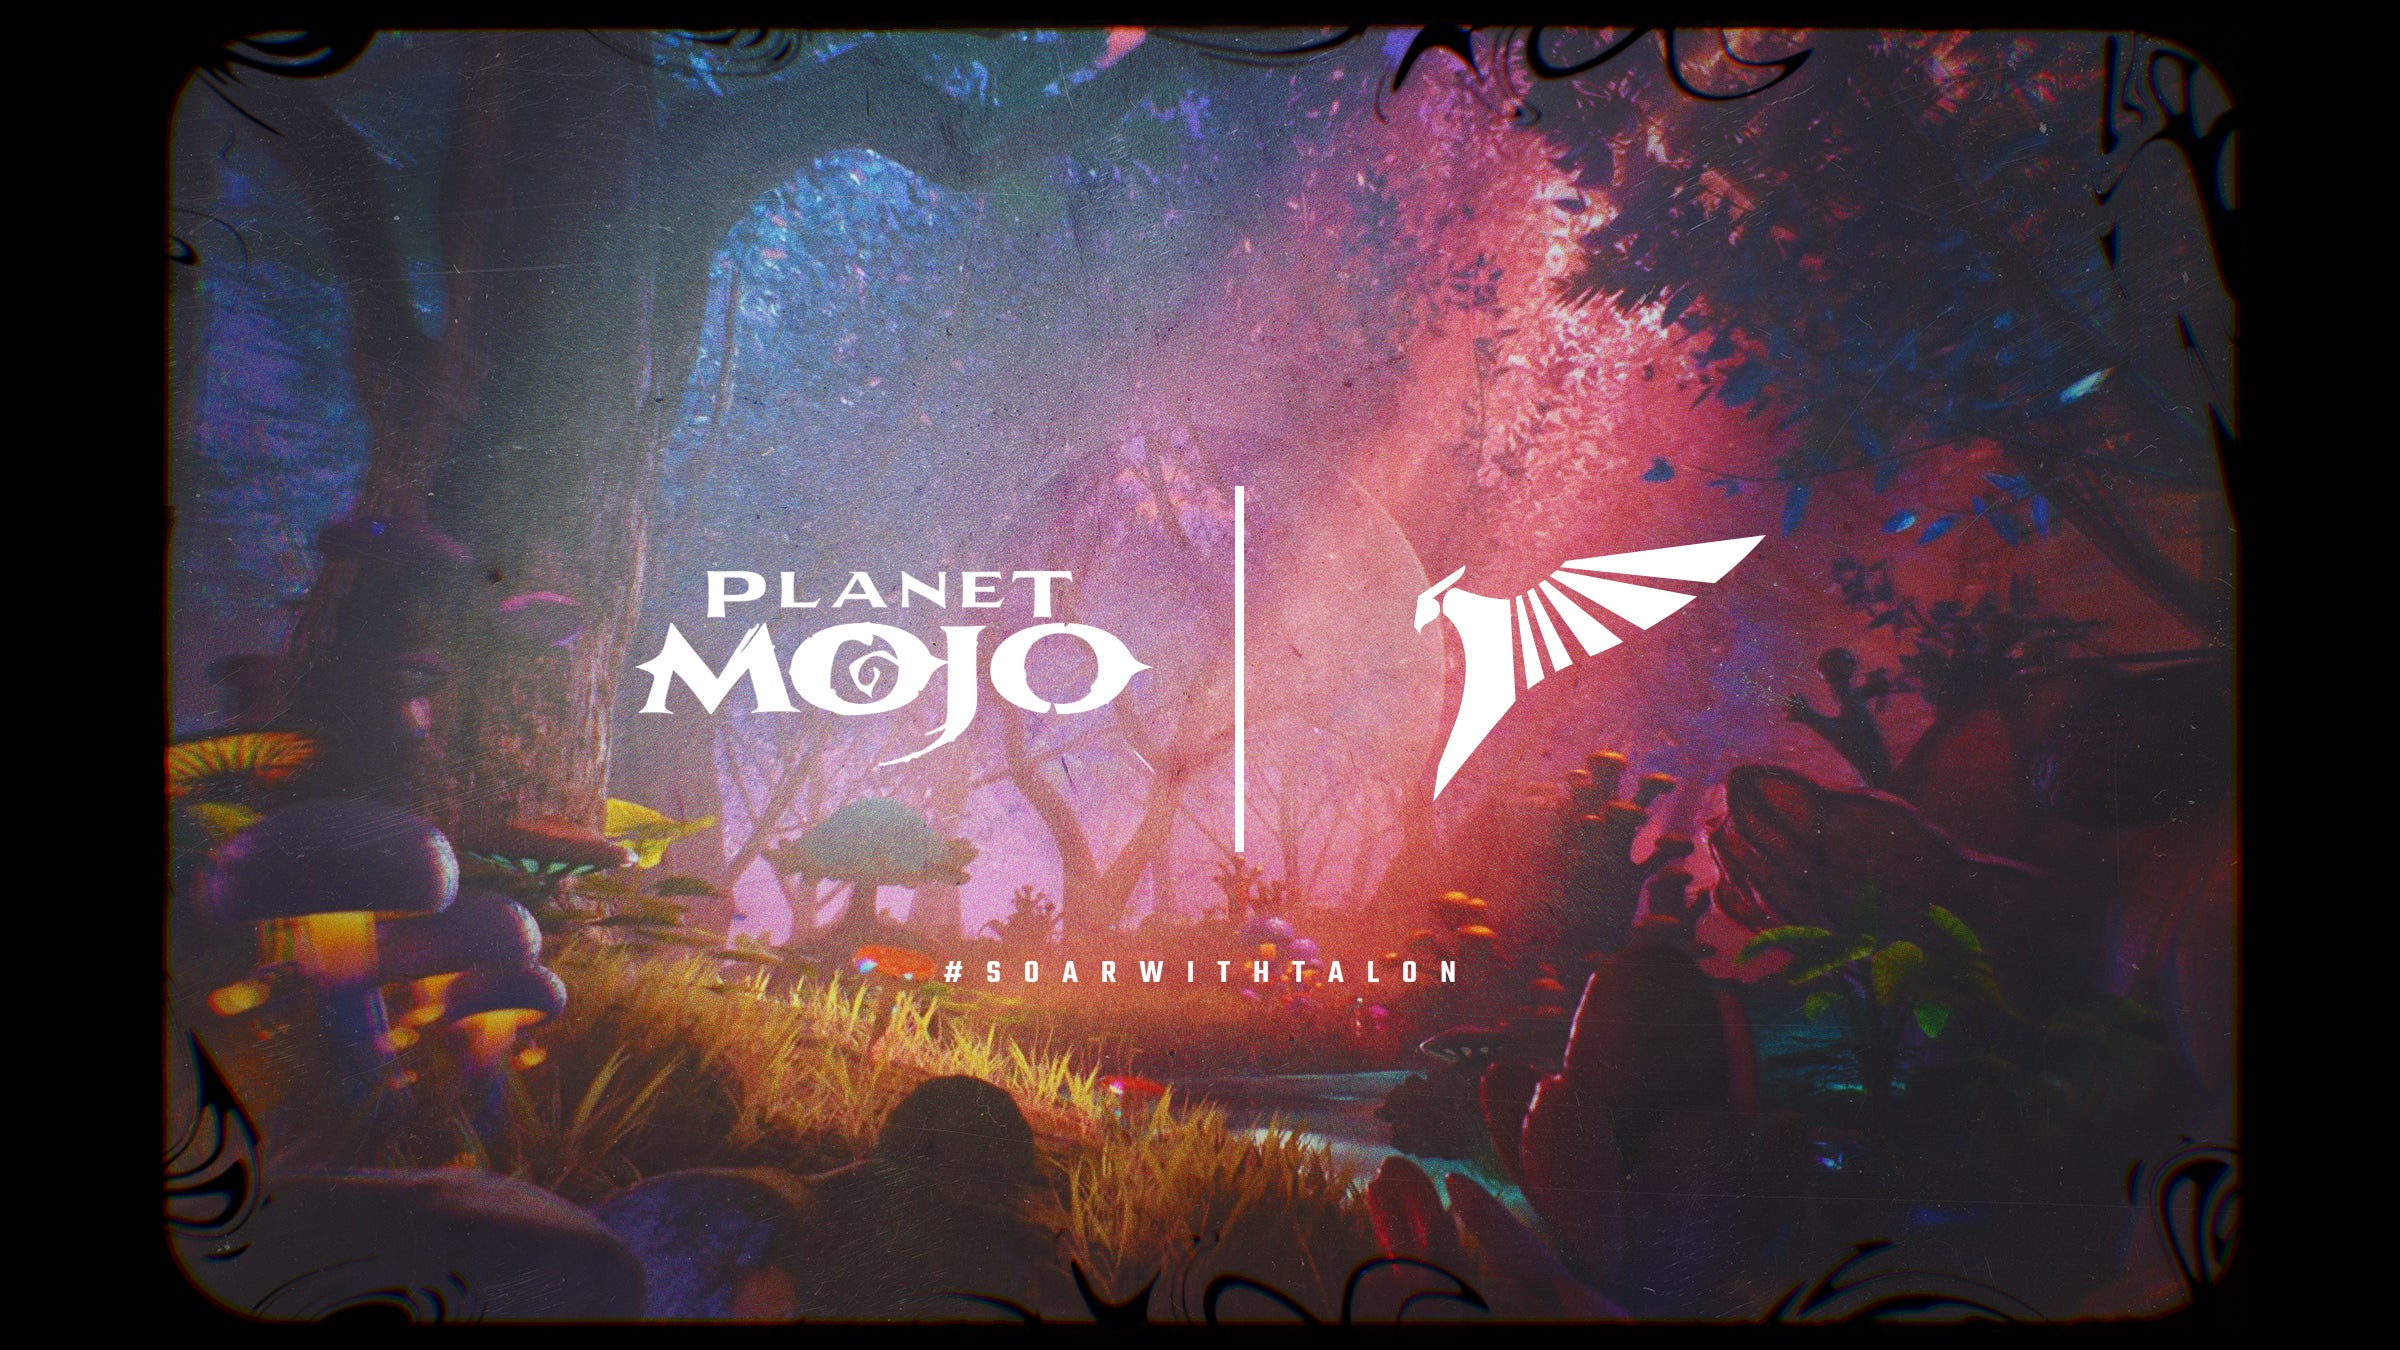 TALON AND PLANET MOJO JOIN FORCES